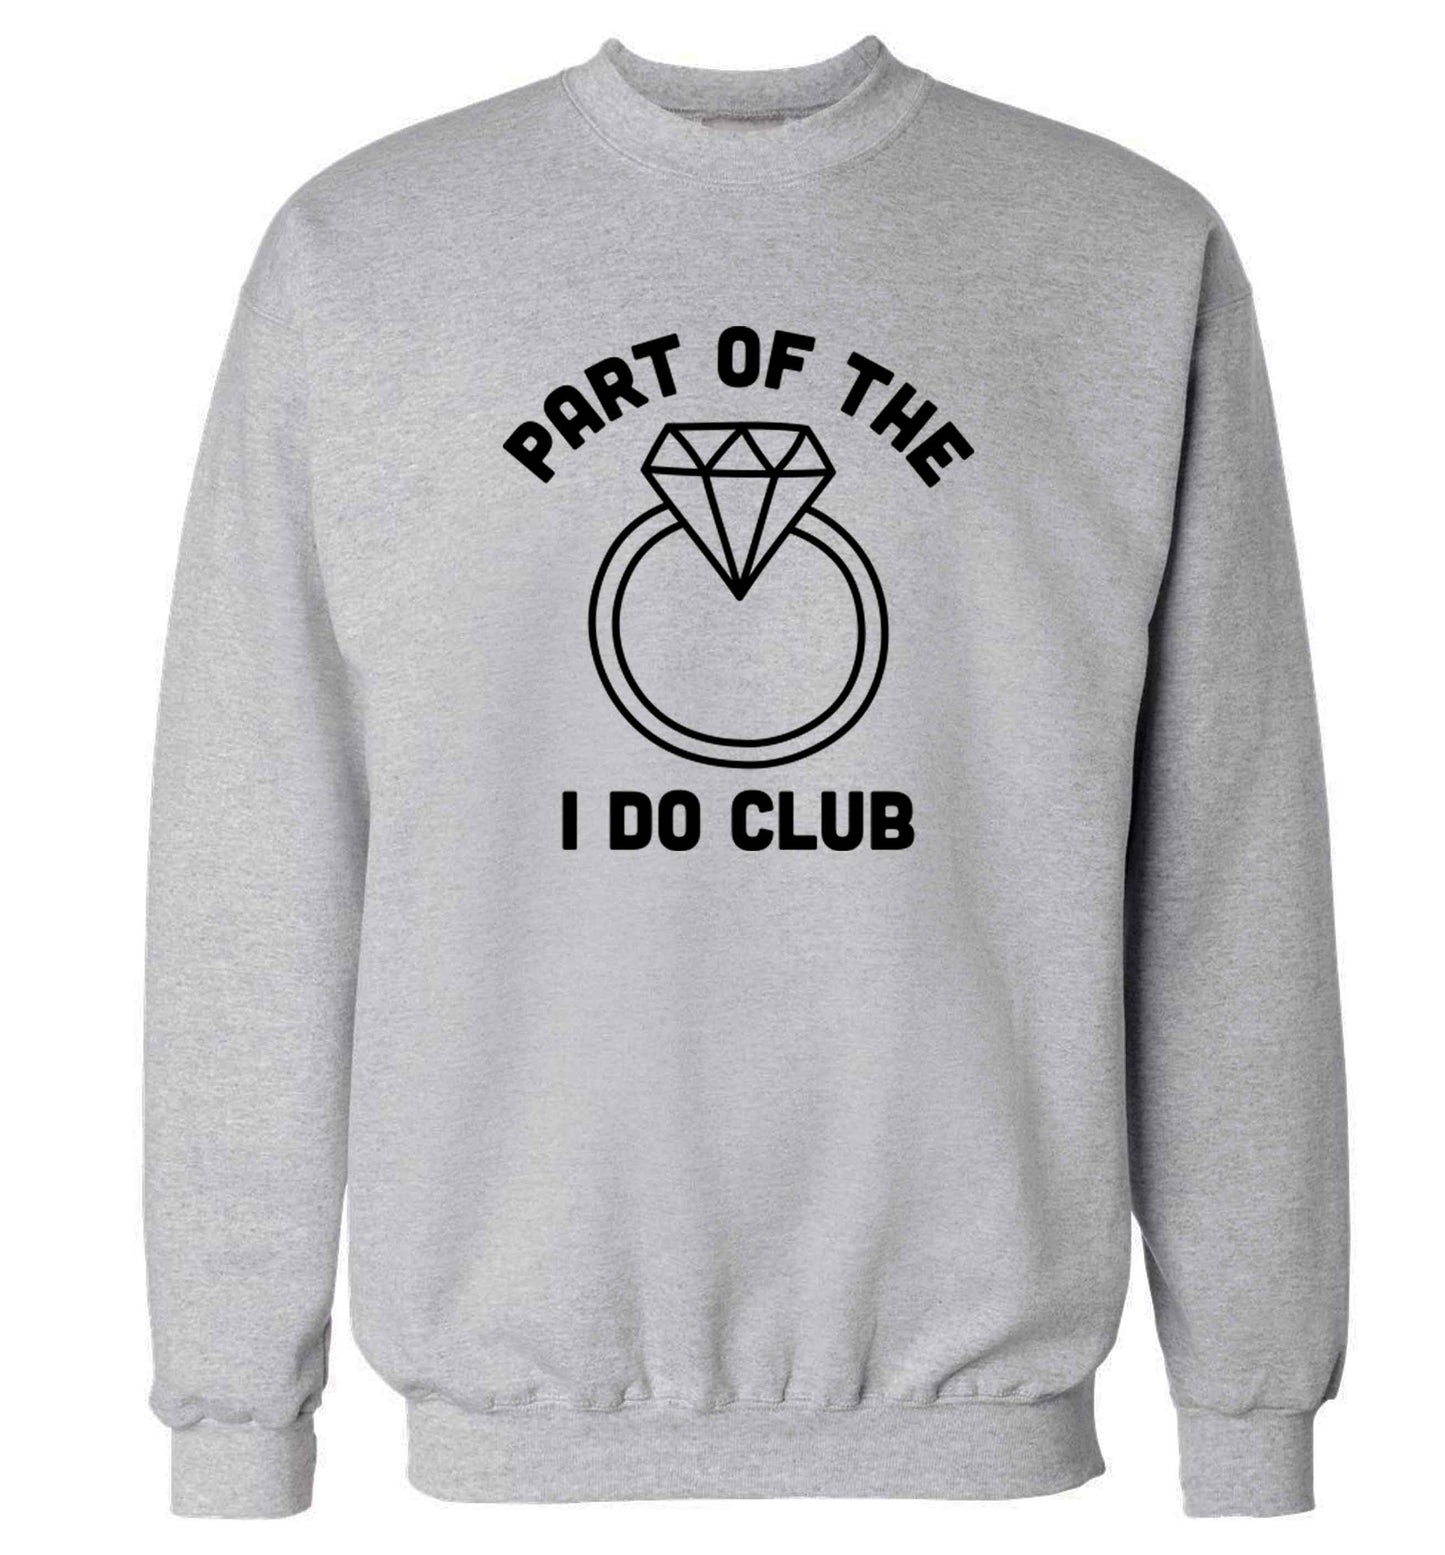 Part of the I do club adult's unisex grey sweater 2XL